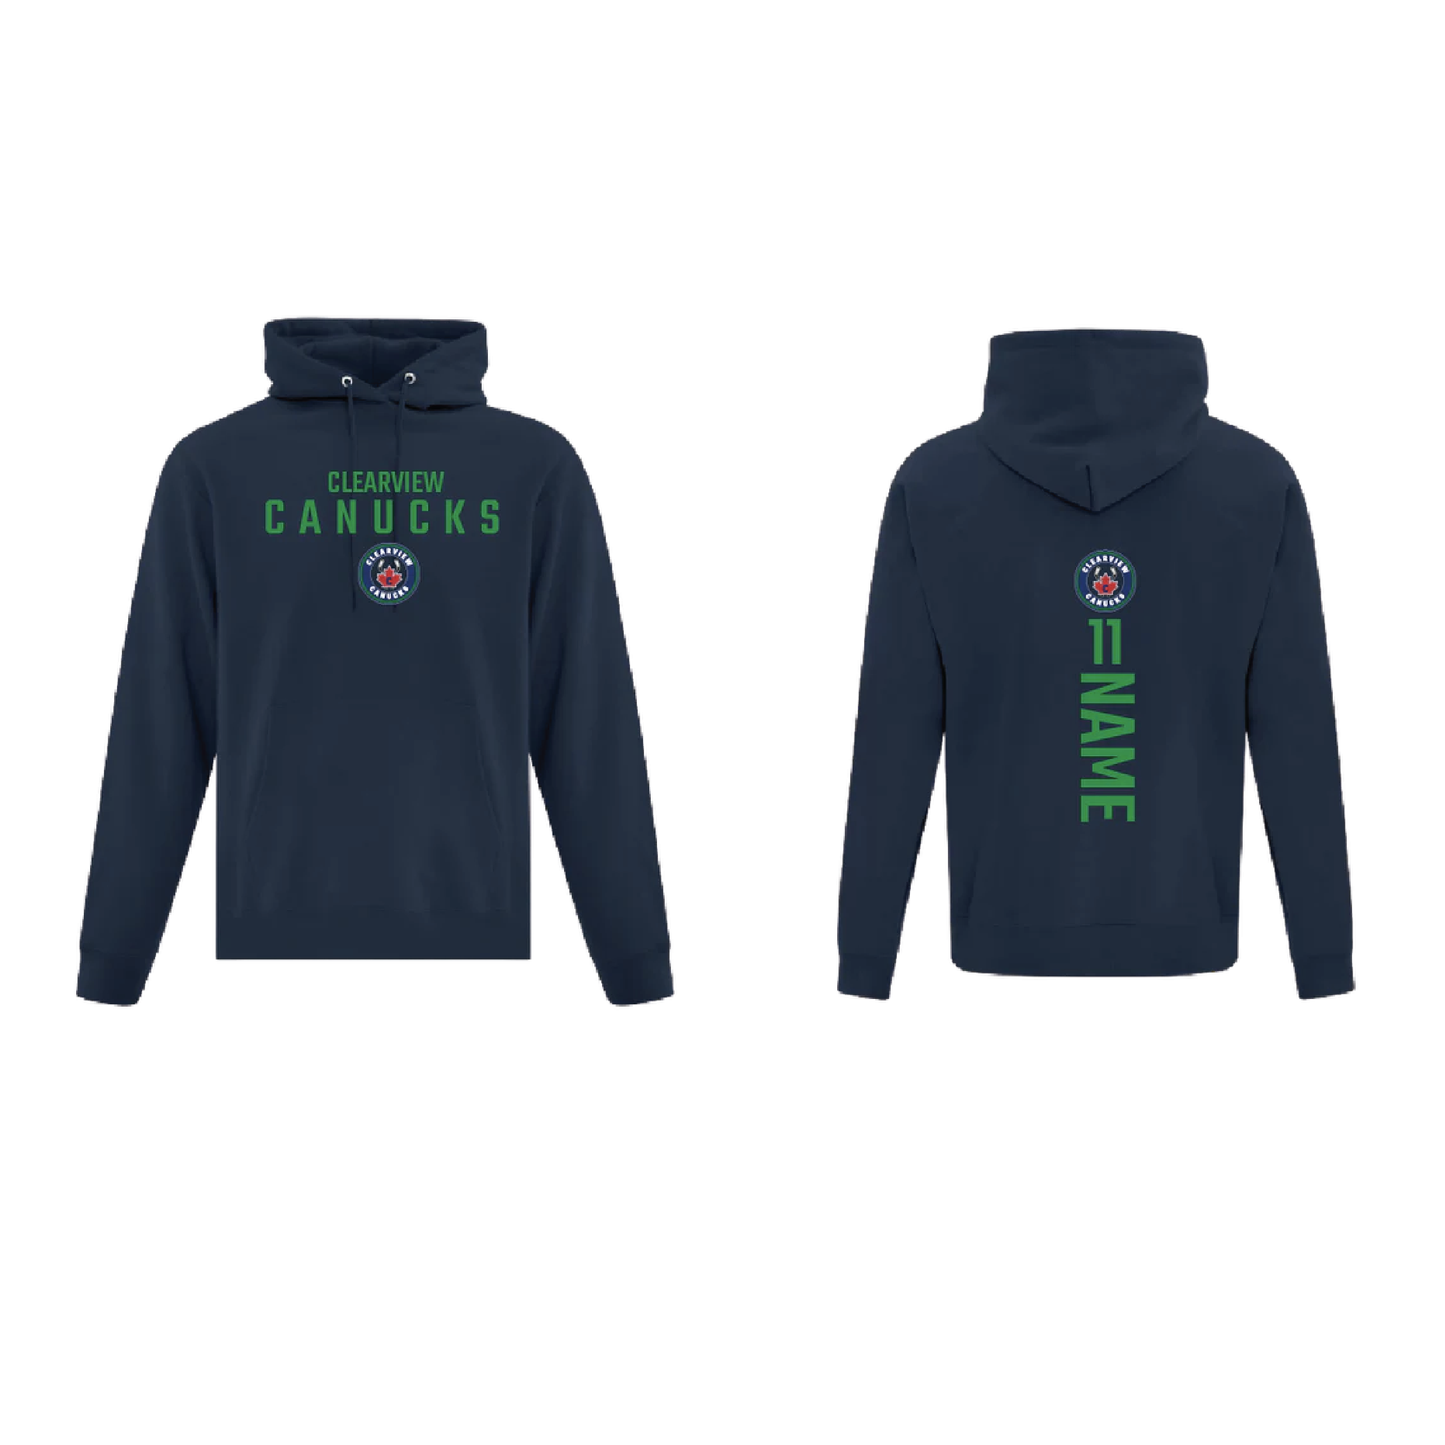 Clearview Canucks Name and Number Hoody